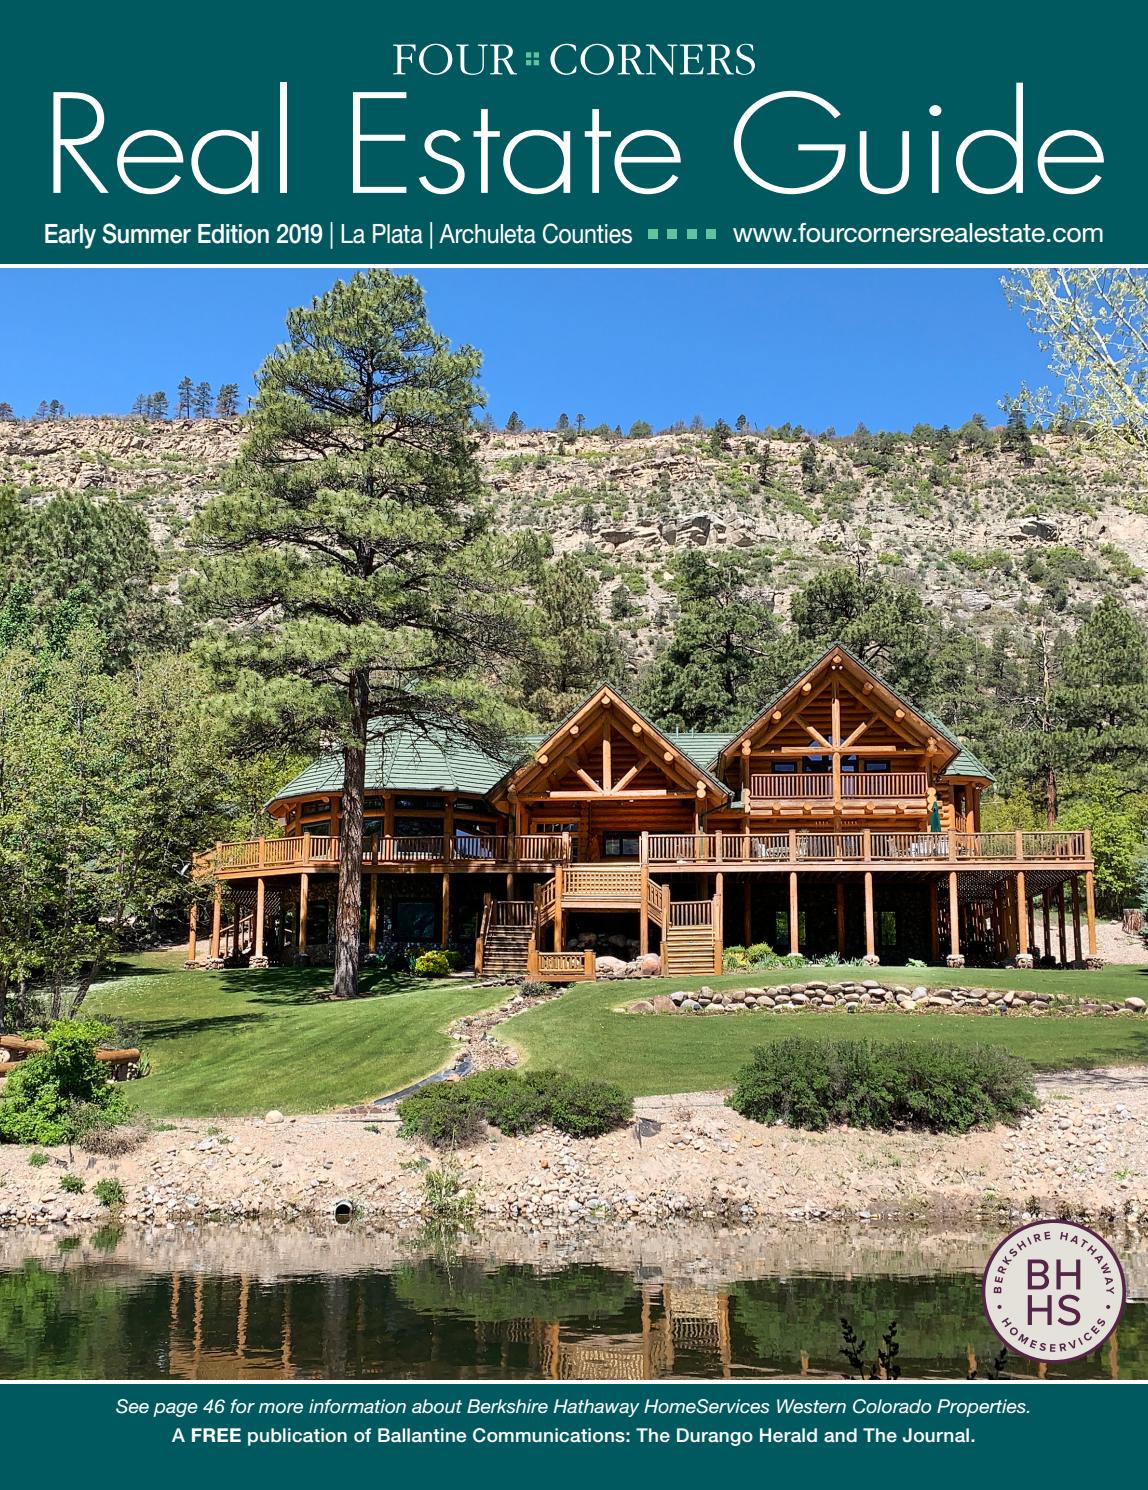 Western Fireplace Colorado Springs New Real Estate Guide Early Summer 2019 by Ballantine